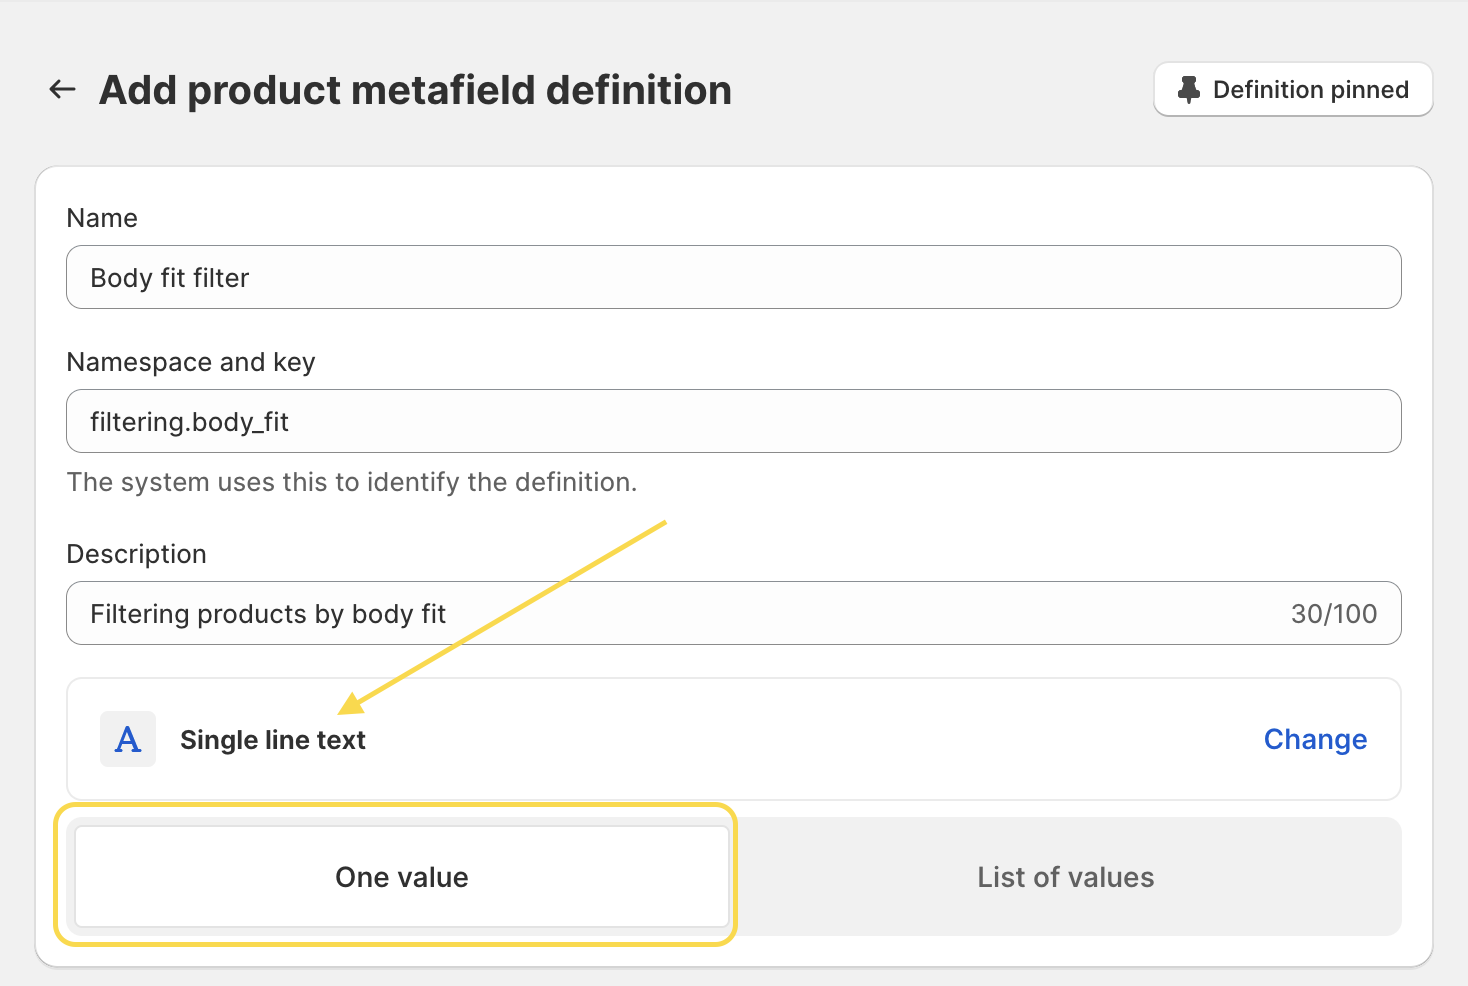 Add a new product metafield definition – single-line text, one value